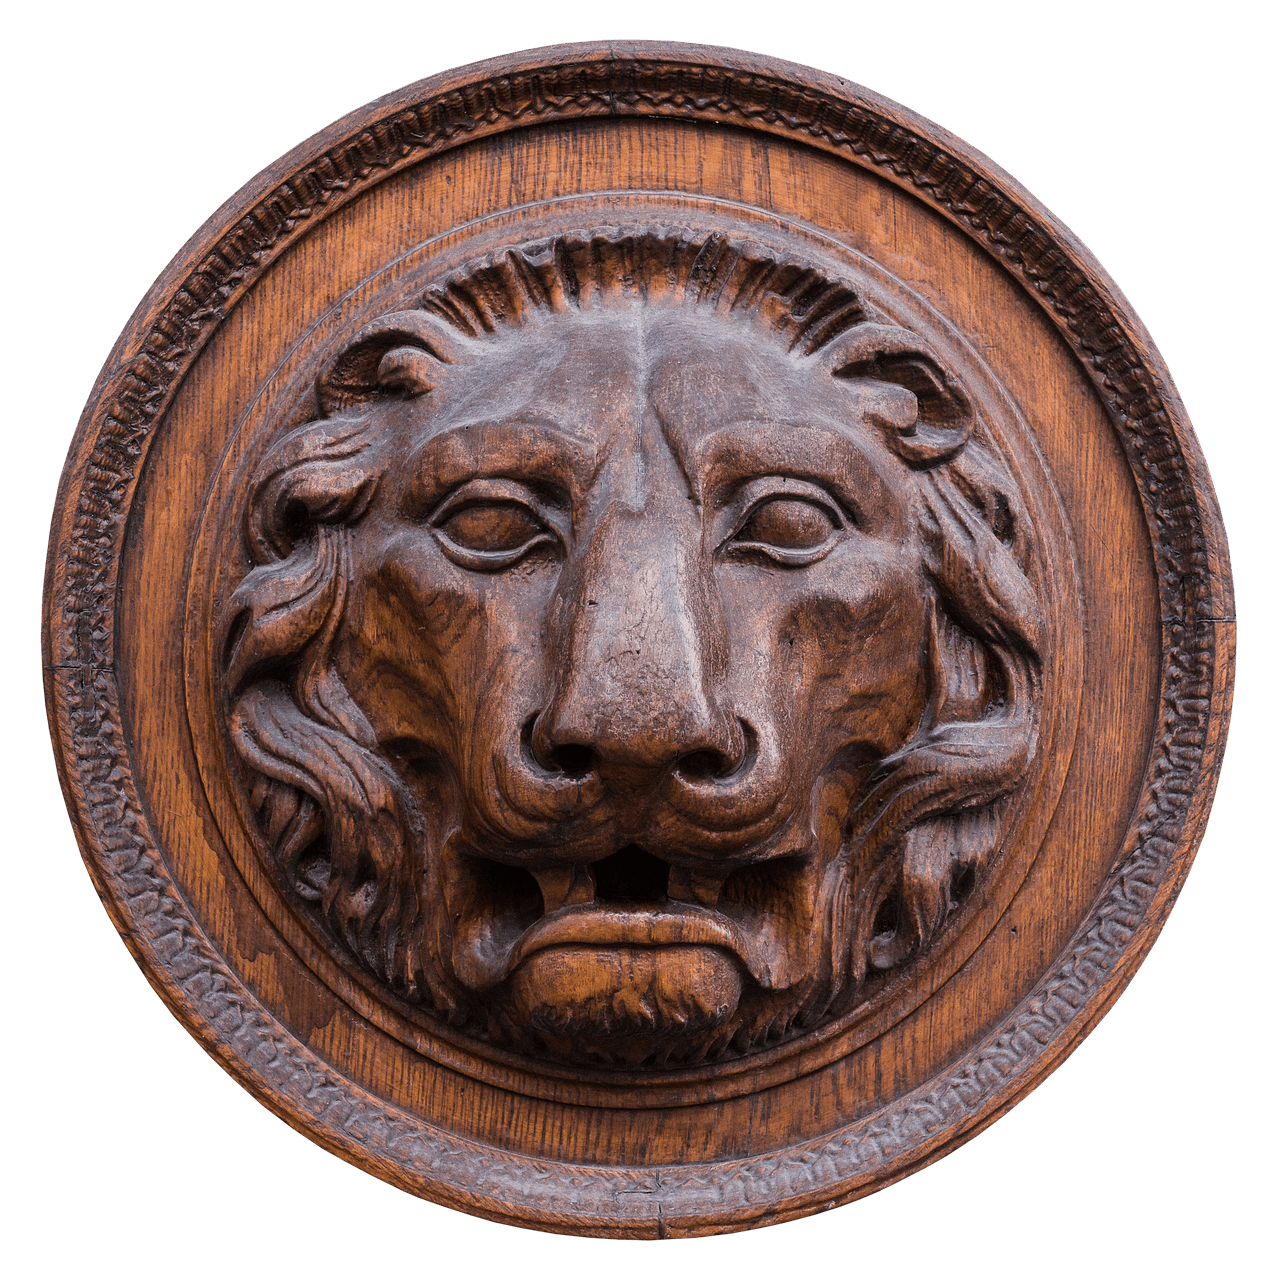 Head of lion carved into a plate